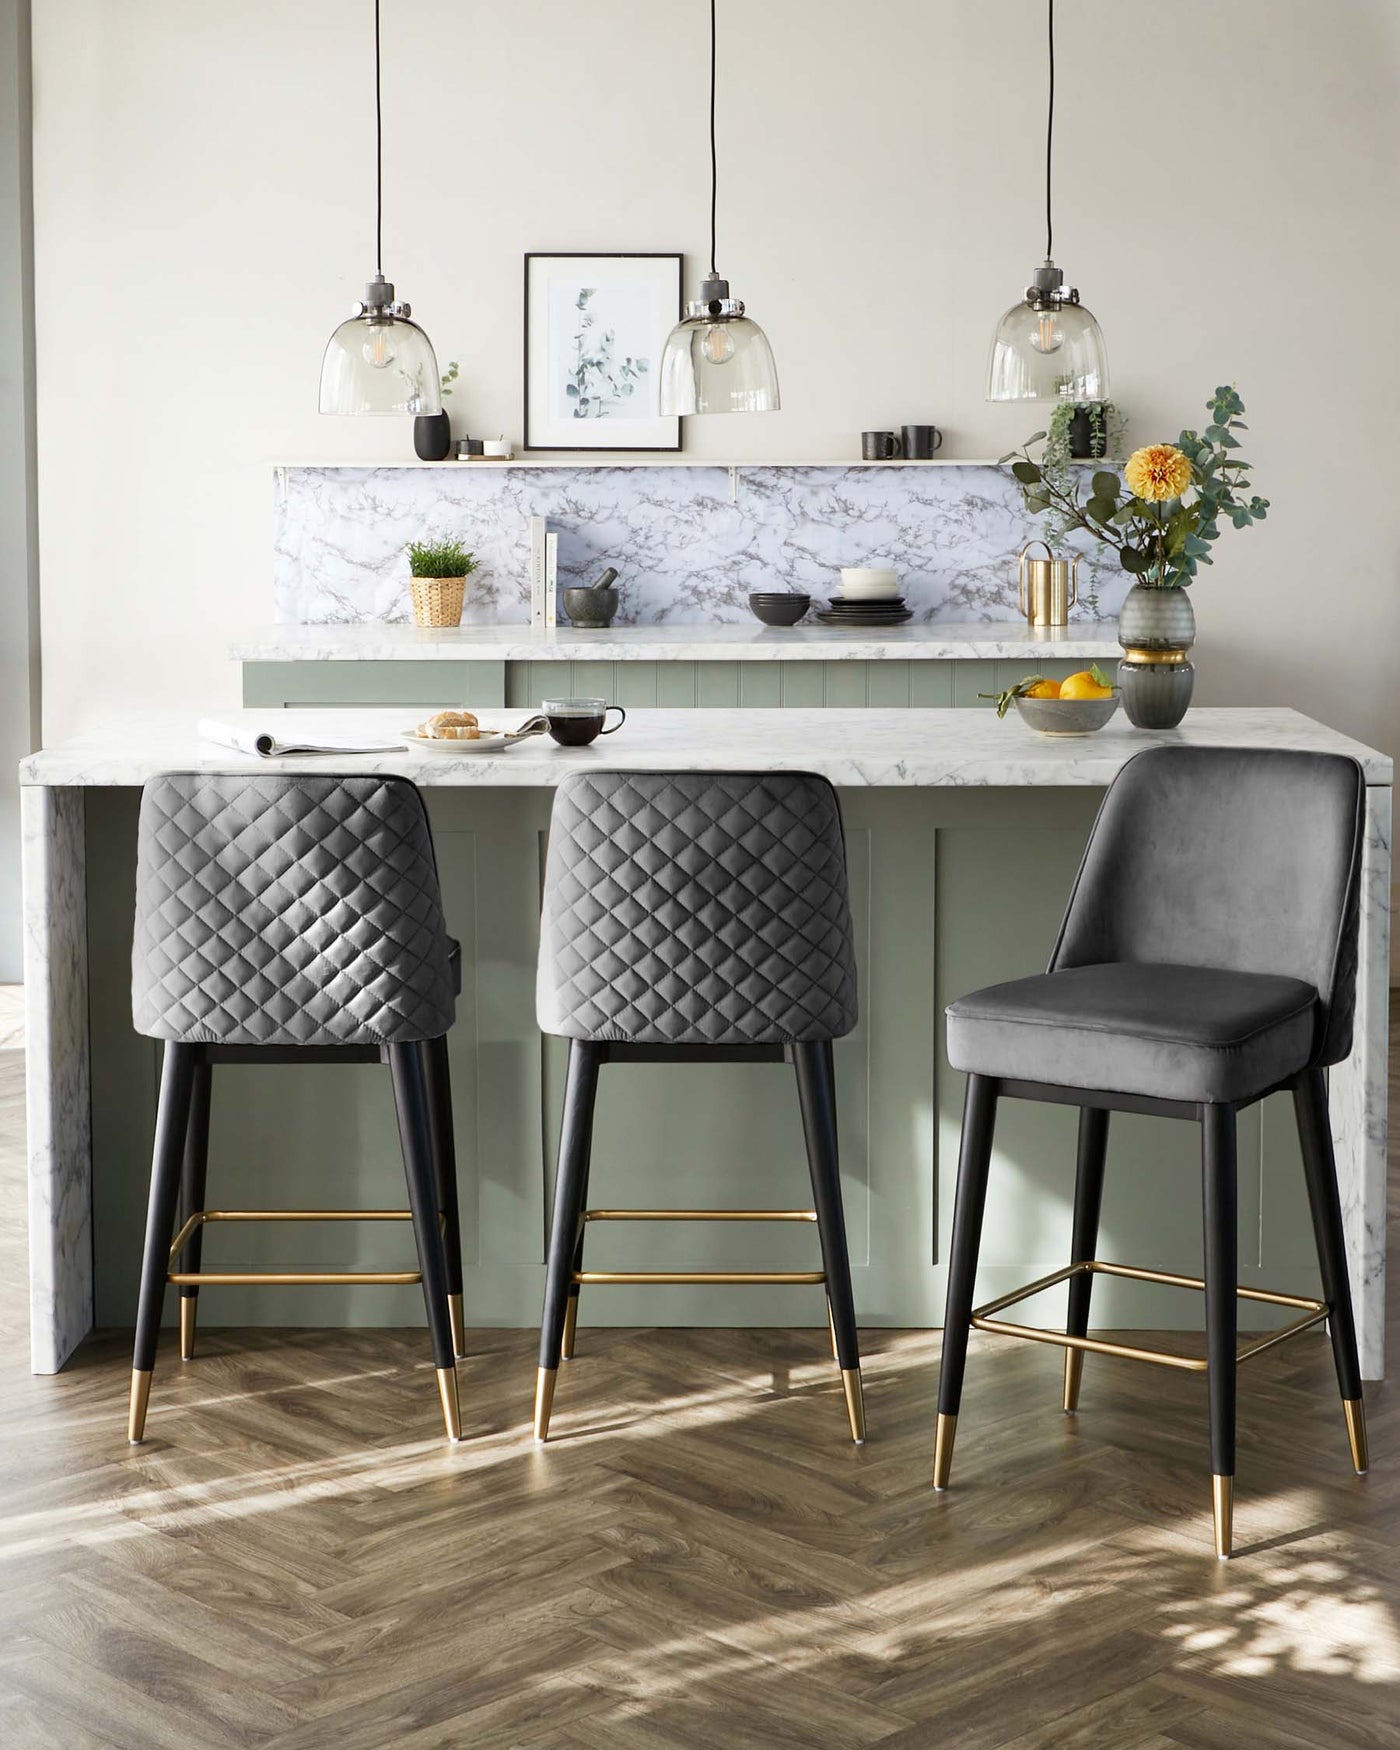 Elegant contemporary bar stools with grey quilted velvet upholstery and black legs accented with gold footrests. The bar stool design features a sleek silhouette and a high backrest, paired with a white marble kitchen island.